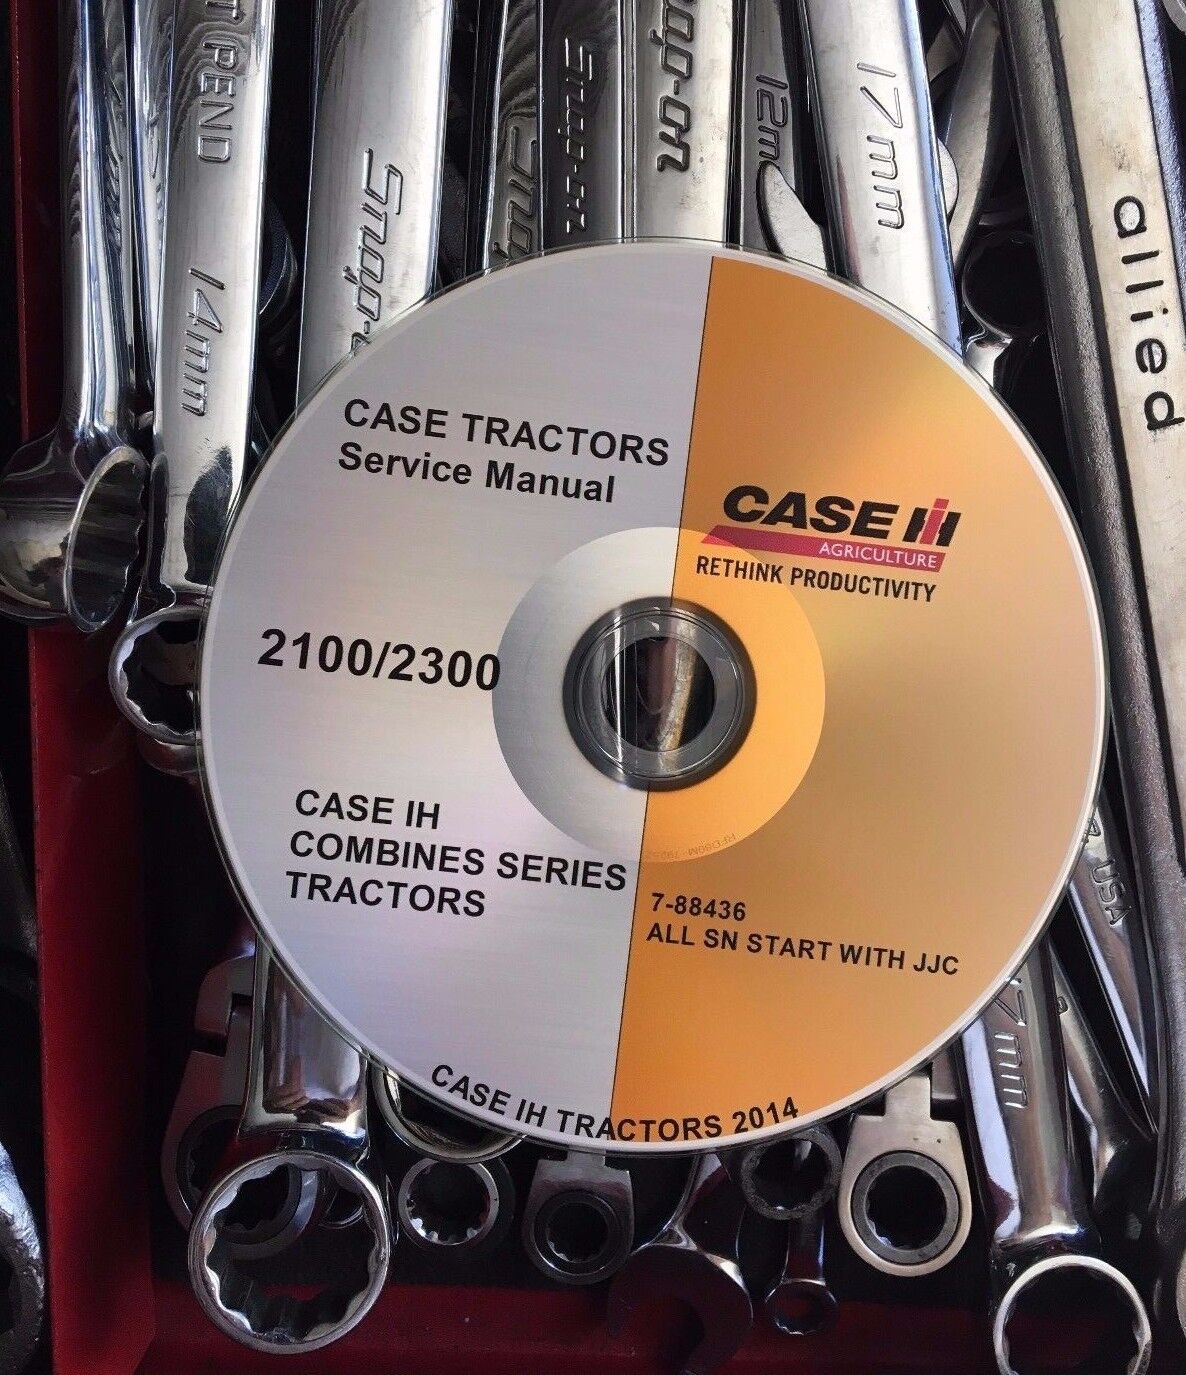 BEST CASE IH COMBINE SERIES 2388 Service Repair Manual and Parts Catalog DVD